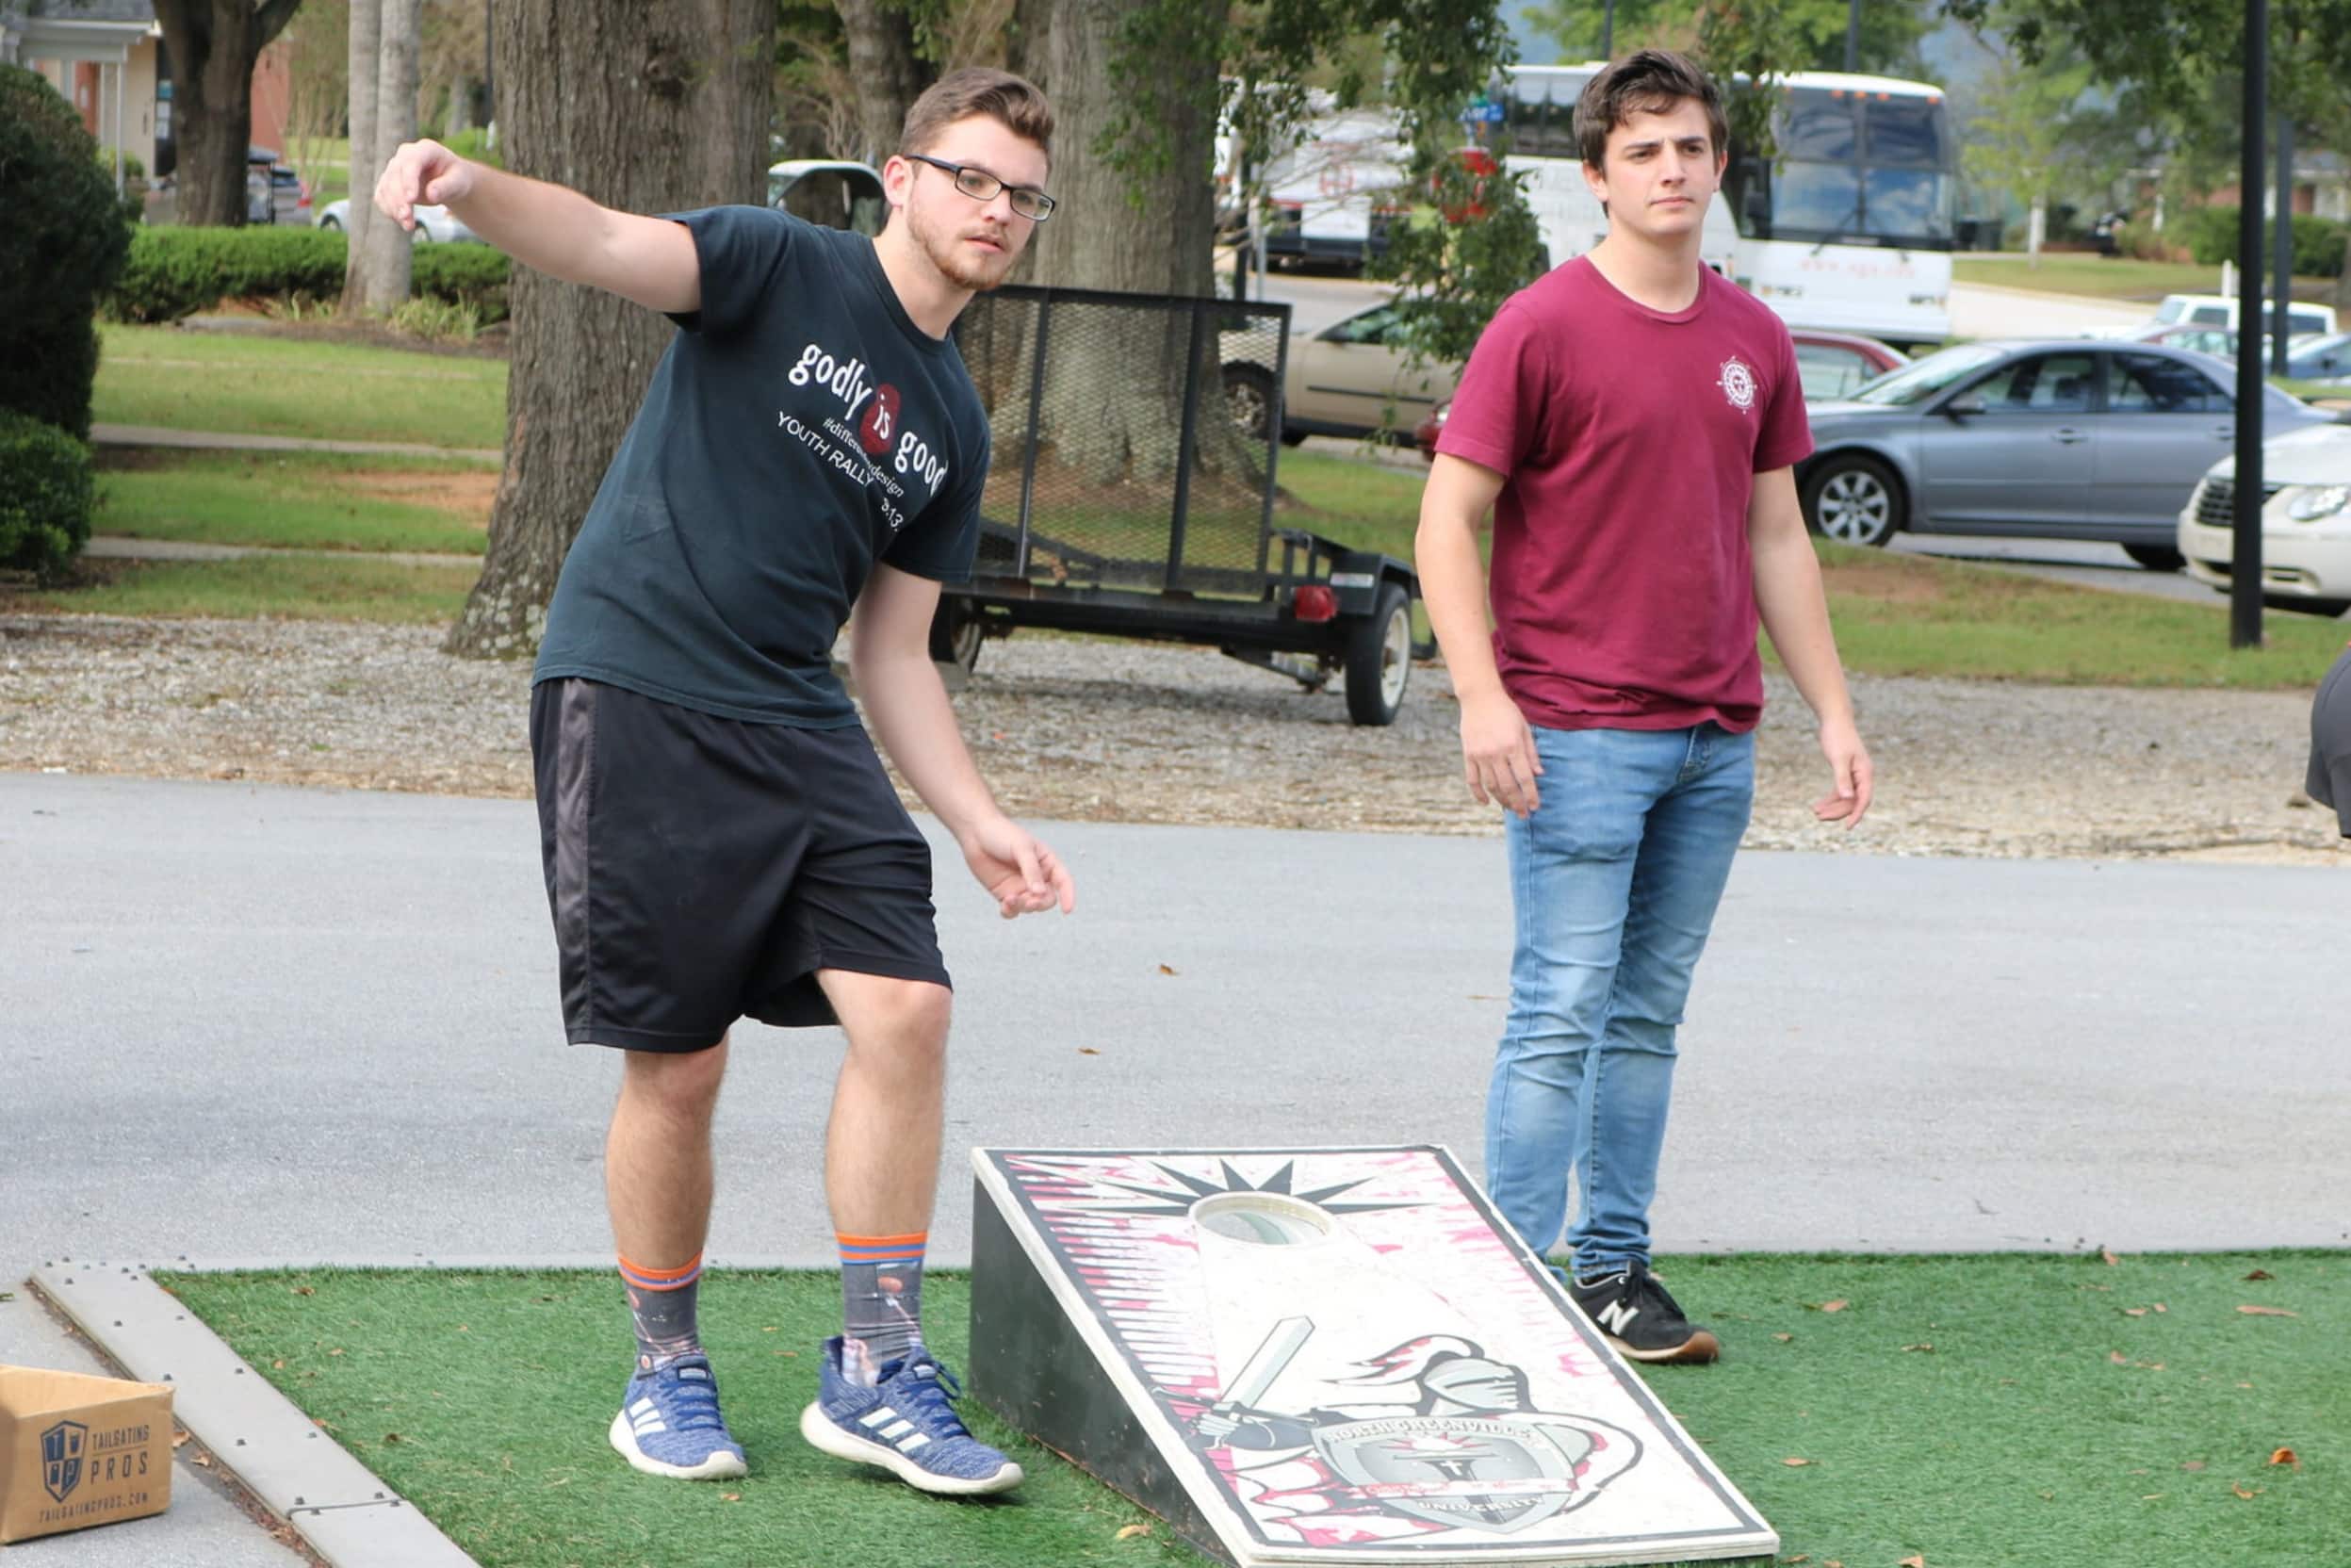 Junior, Jonny Hannah and senior, Jon Andrews are focusing in on winning for their clubs when playing in the Corn-Hole Tournament Tuesday afternoon.